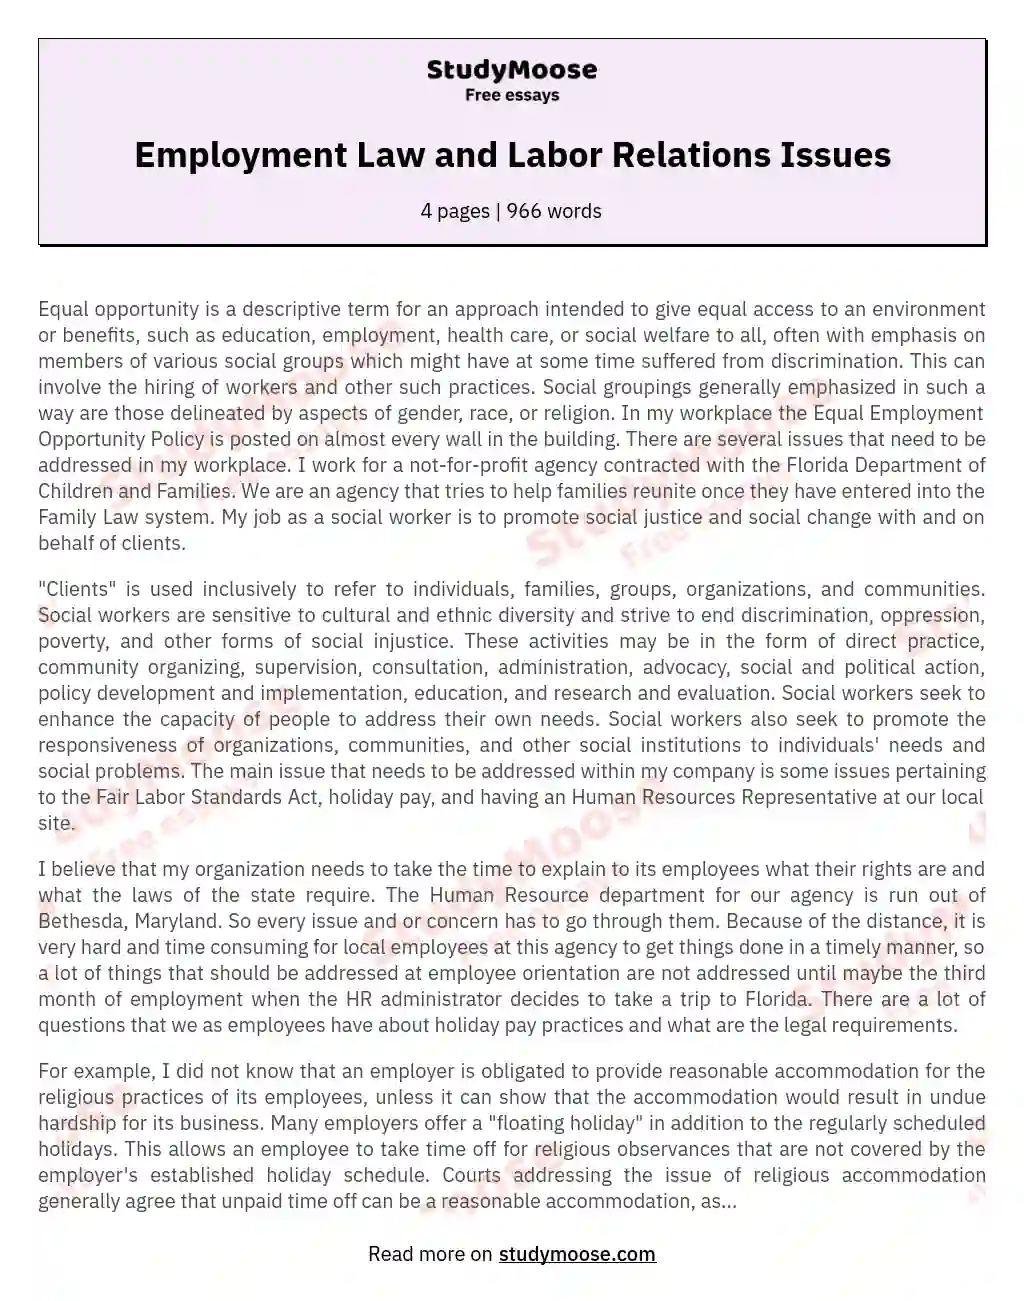 Employment Law and Labor Relations Issues